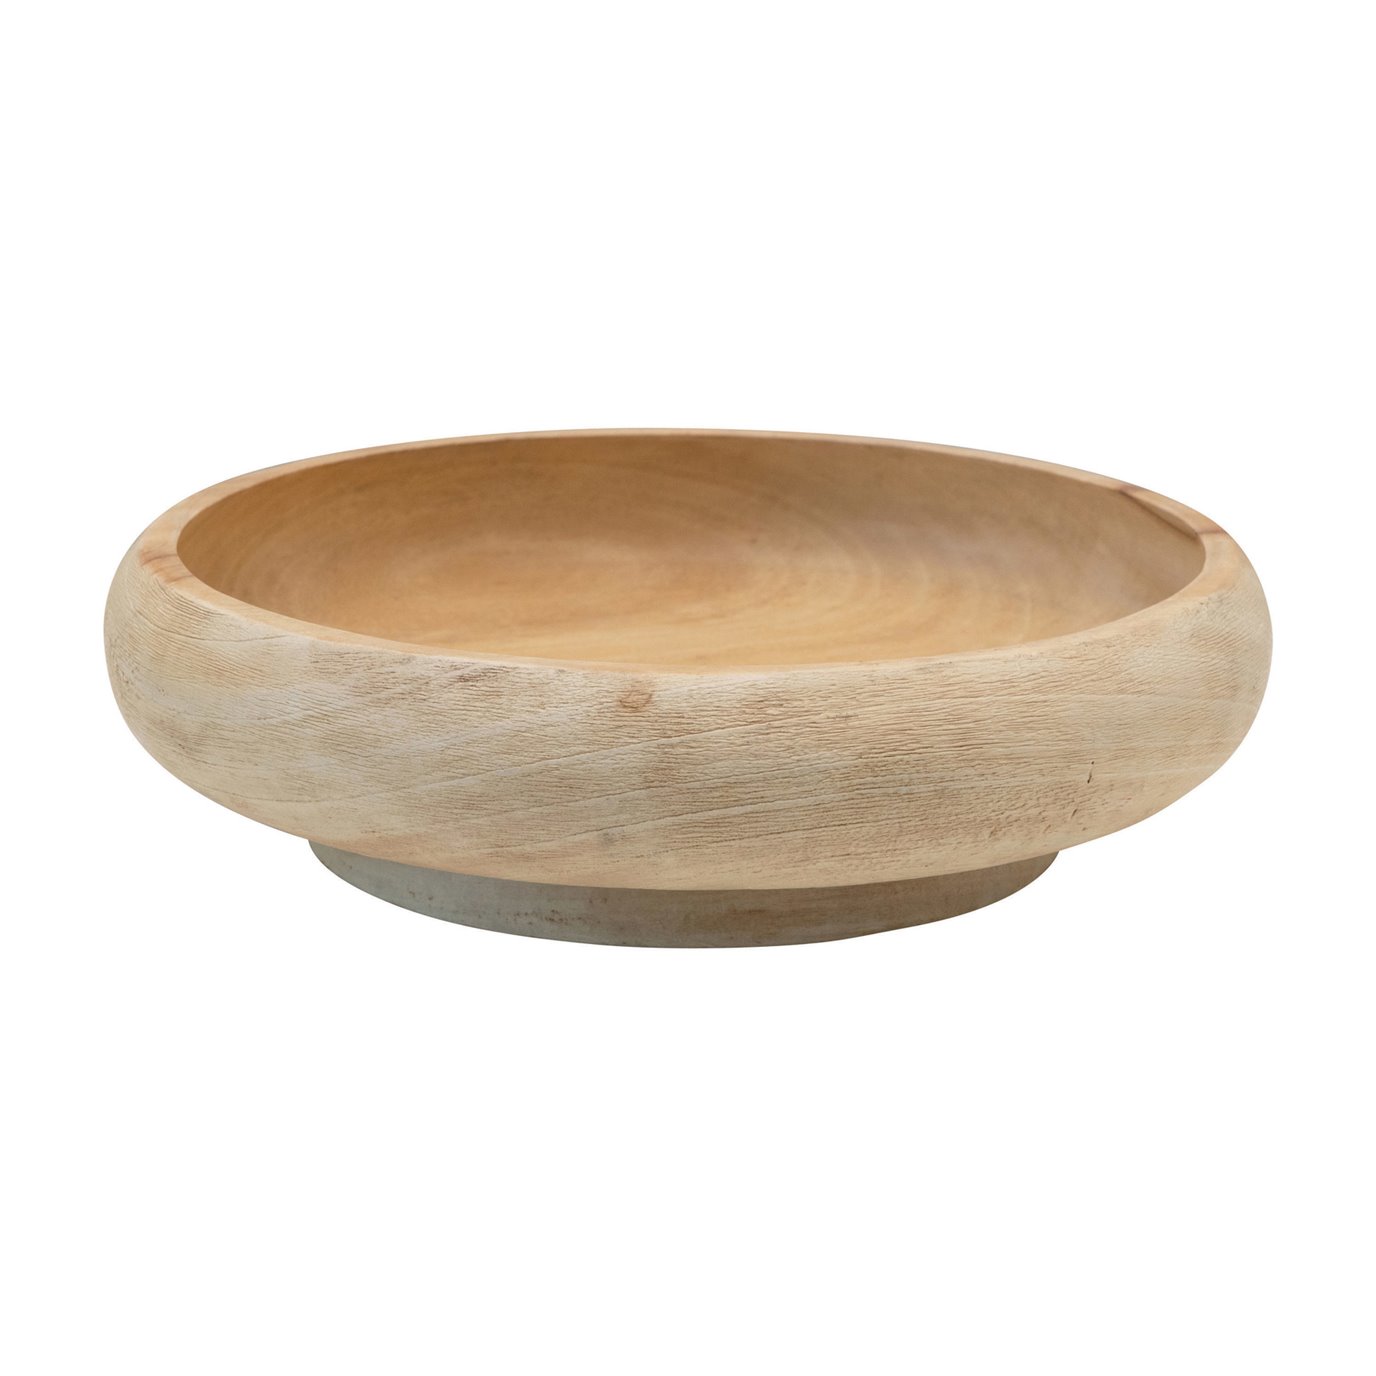 Mango Wood Bowl, Combed & Bleached